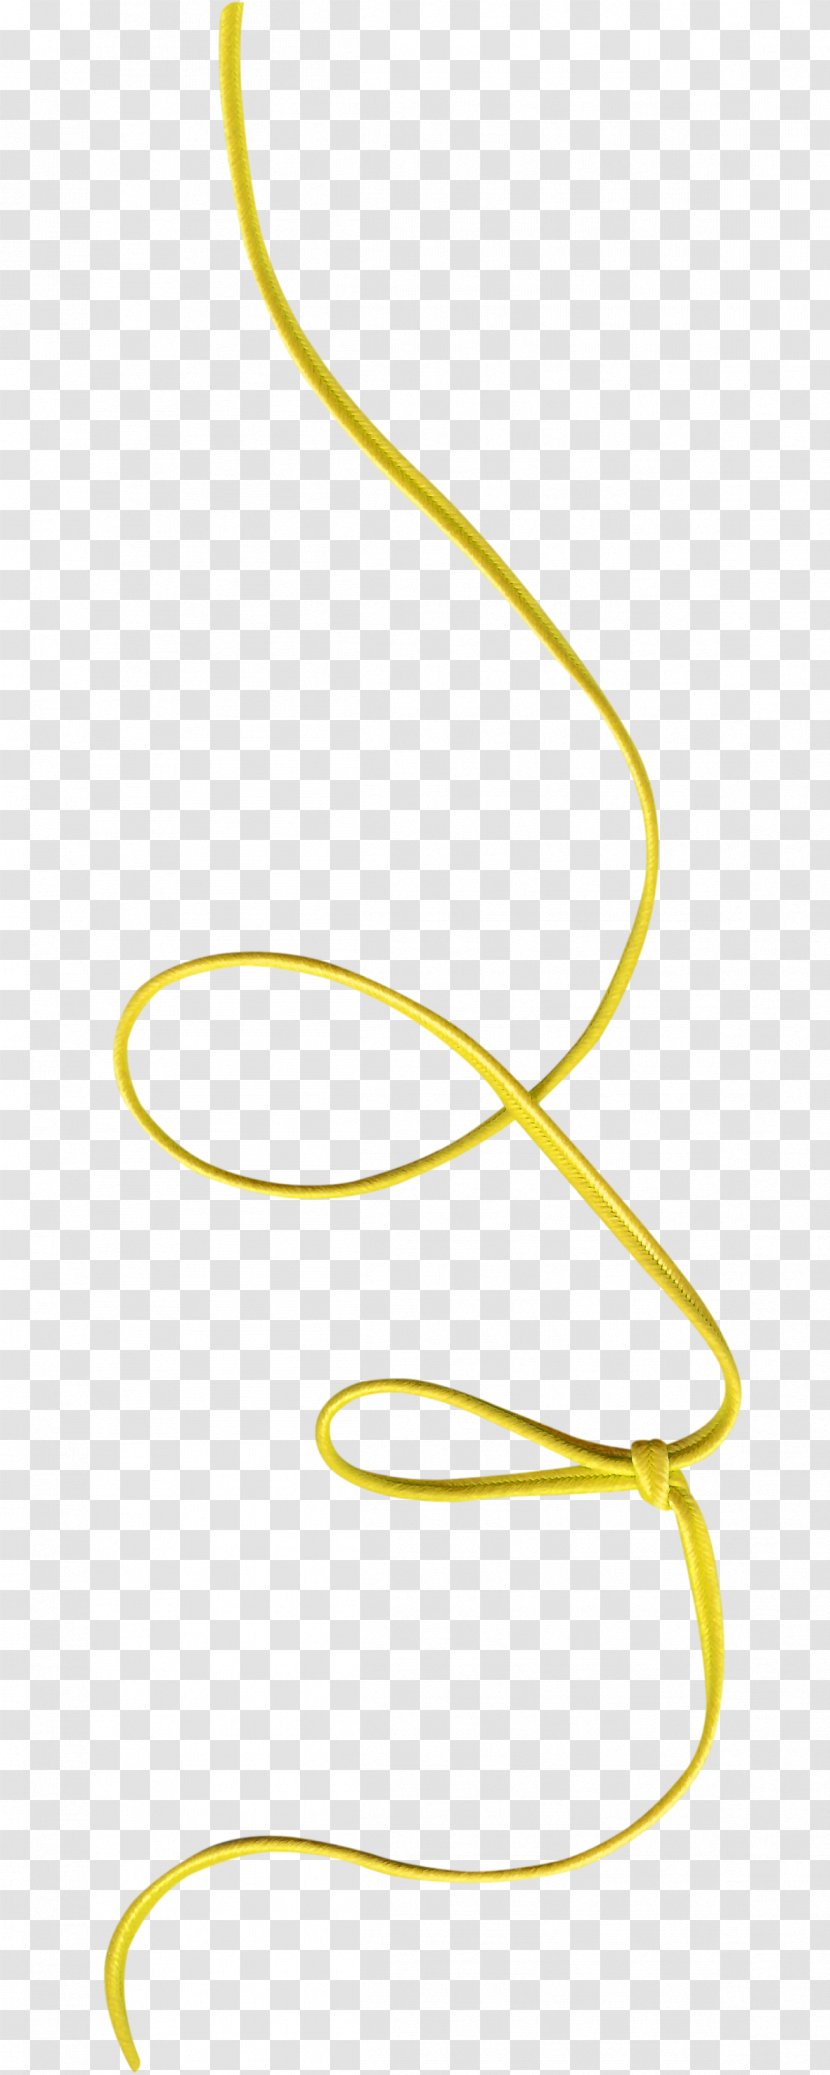 Circle Angle - Yellow - Rope Knot Transparent PNG